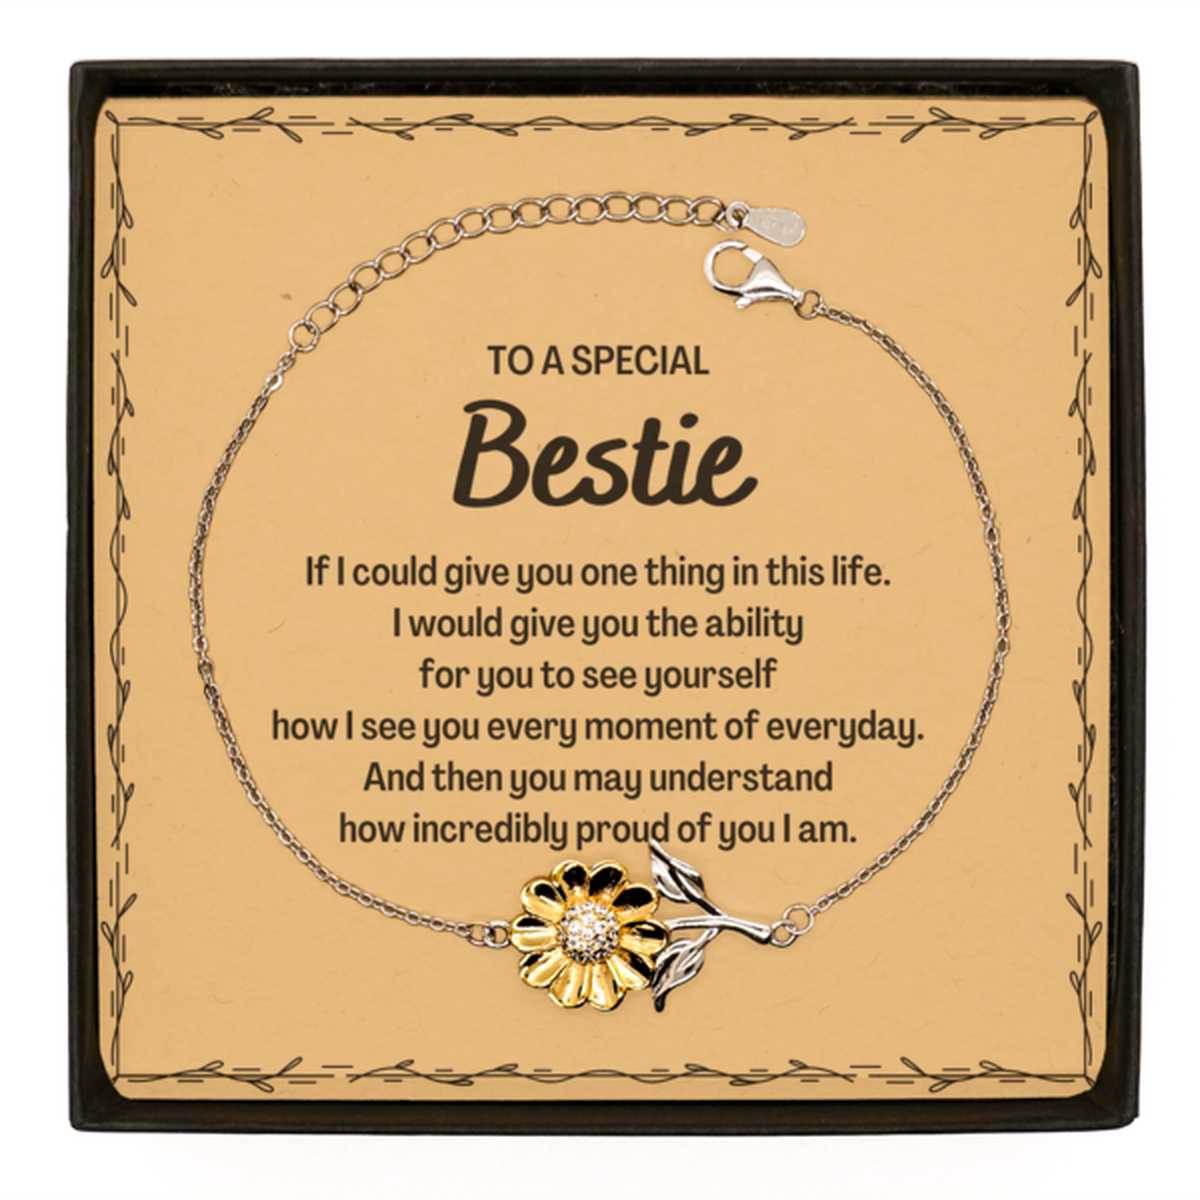 To My Bestie Sunflower Bracelet, Gifts For Bestie Message Card, Inspirational Gifts for Christmas Birthday, Epic Gifts for Bestie To A Special Bestie how incredibly proud of you I am